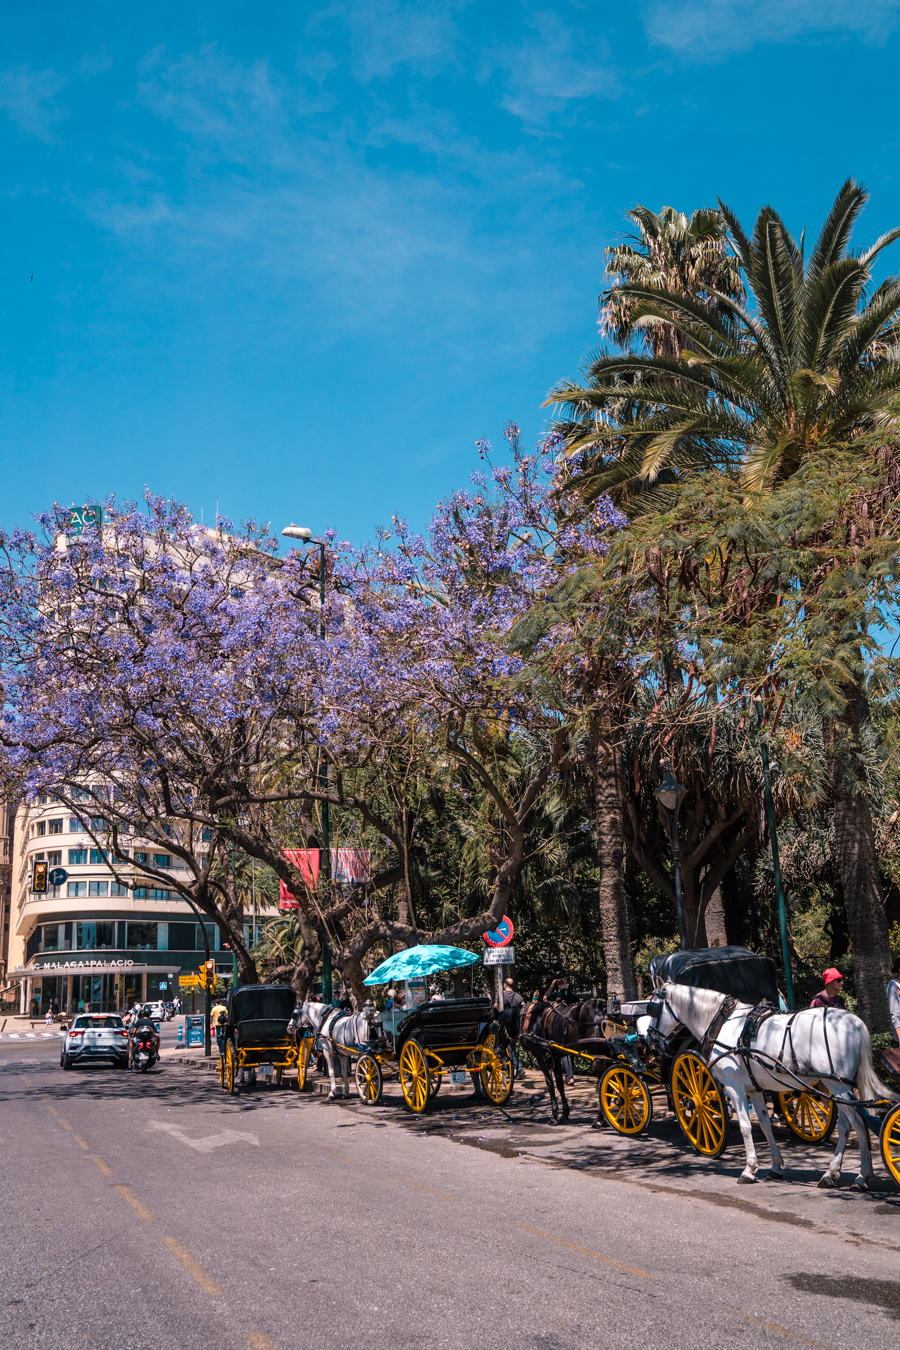 horse carriages in Malaga, Spain